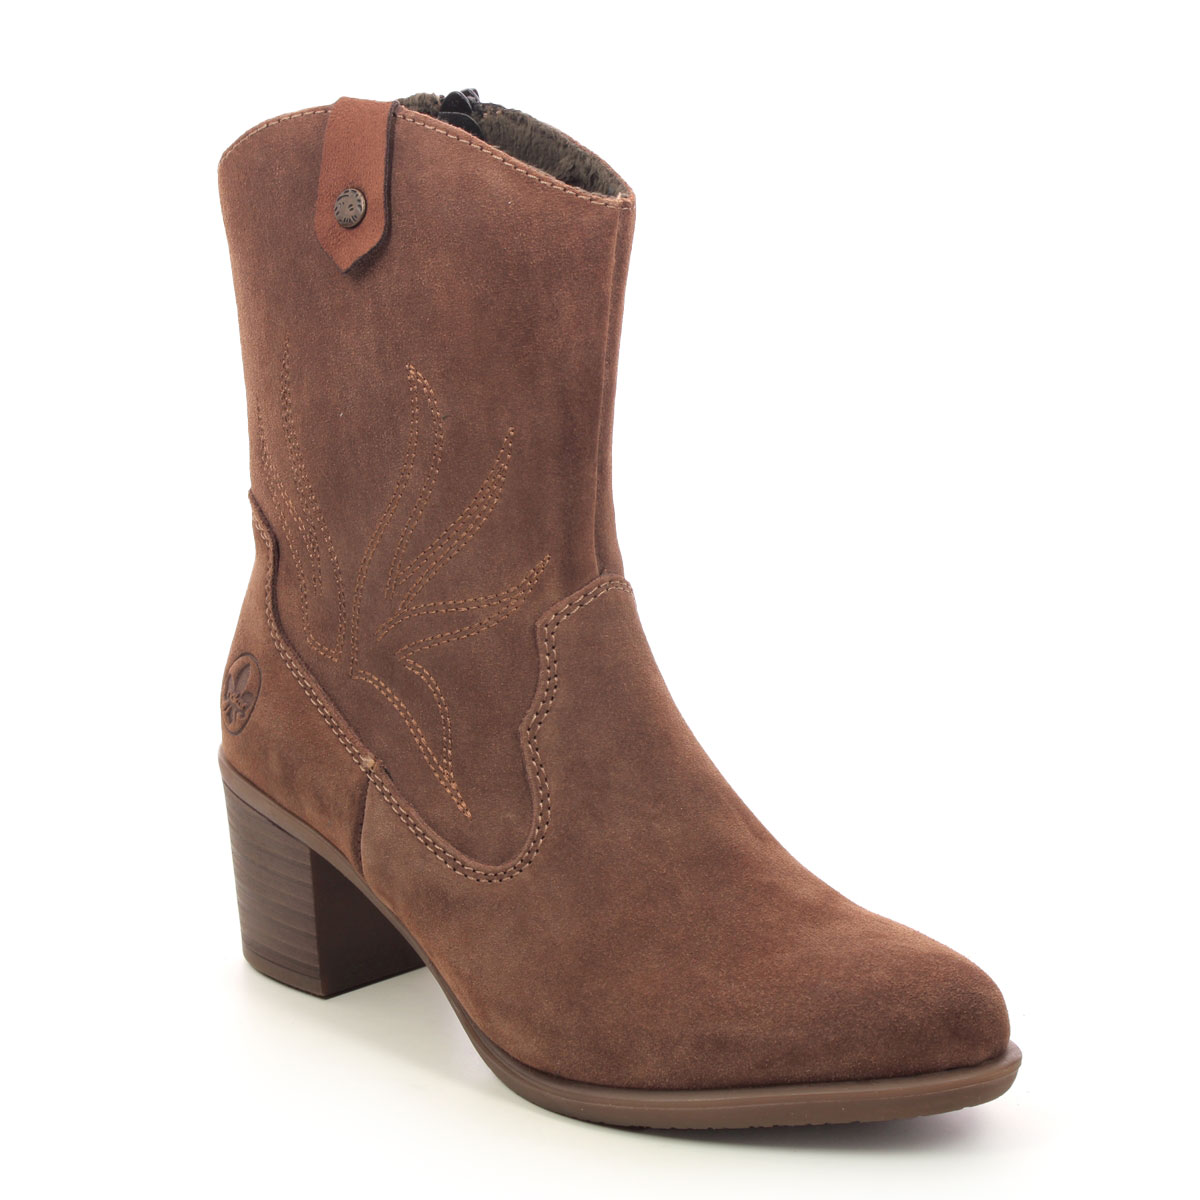 Rieker Tan Suede ankle boots